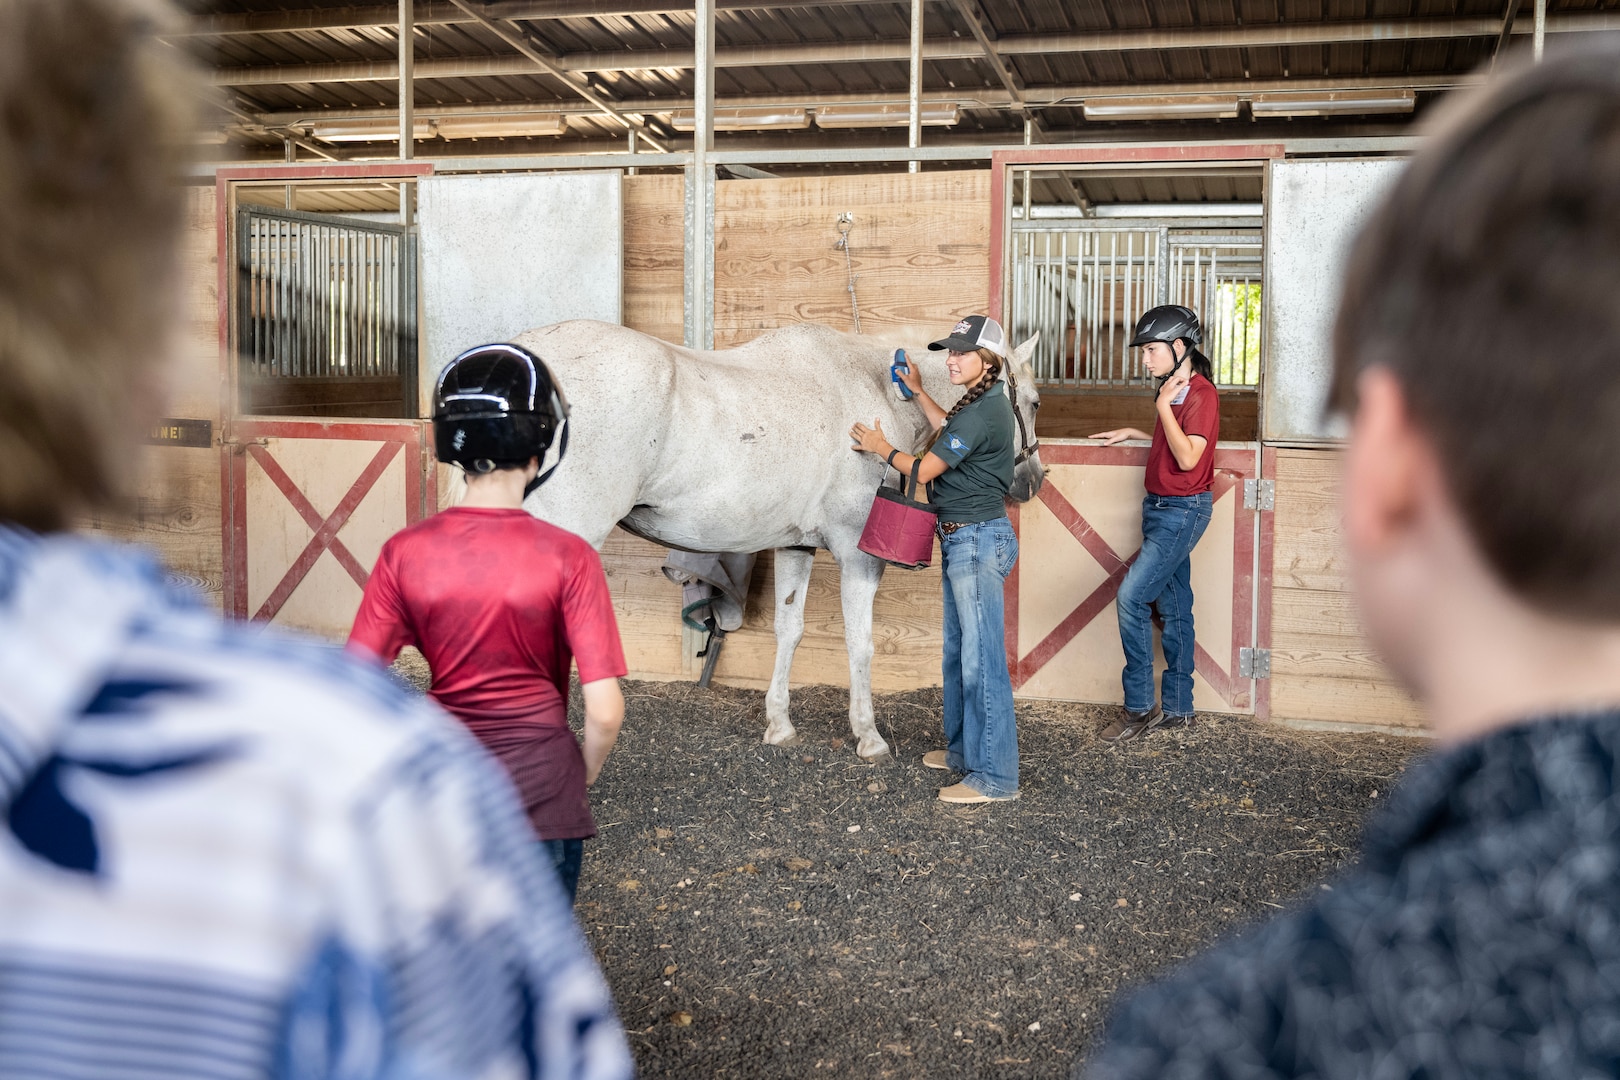 Equestrian instructor showing children how to brush a horse.